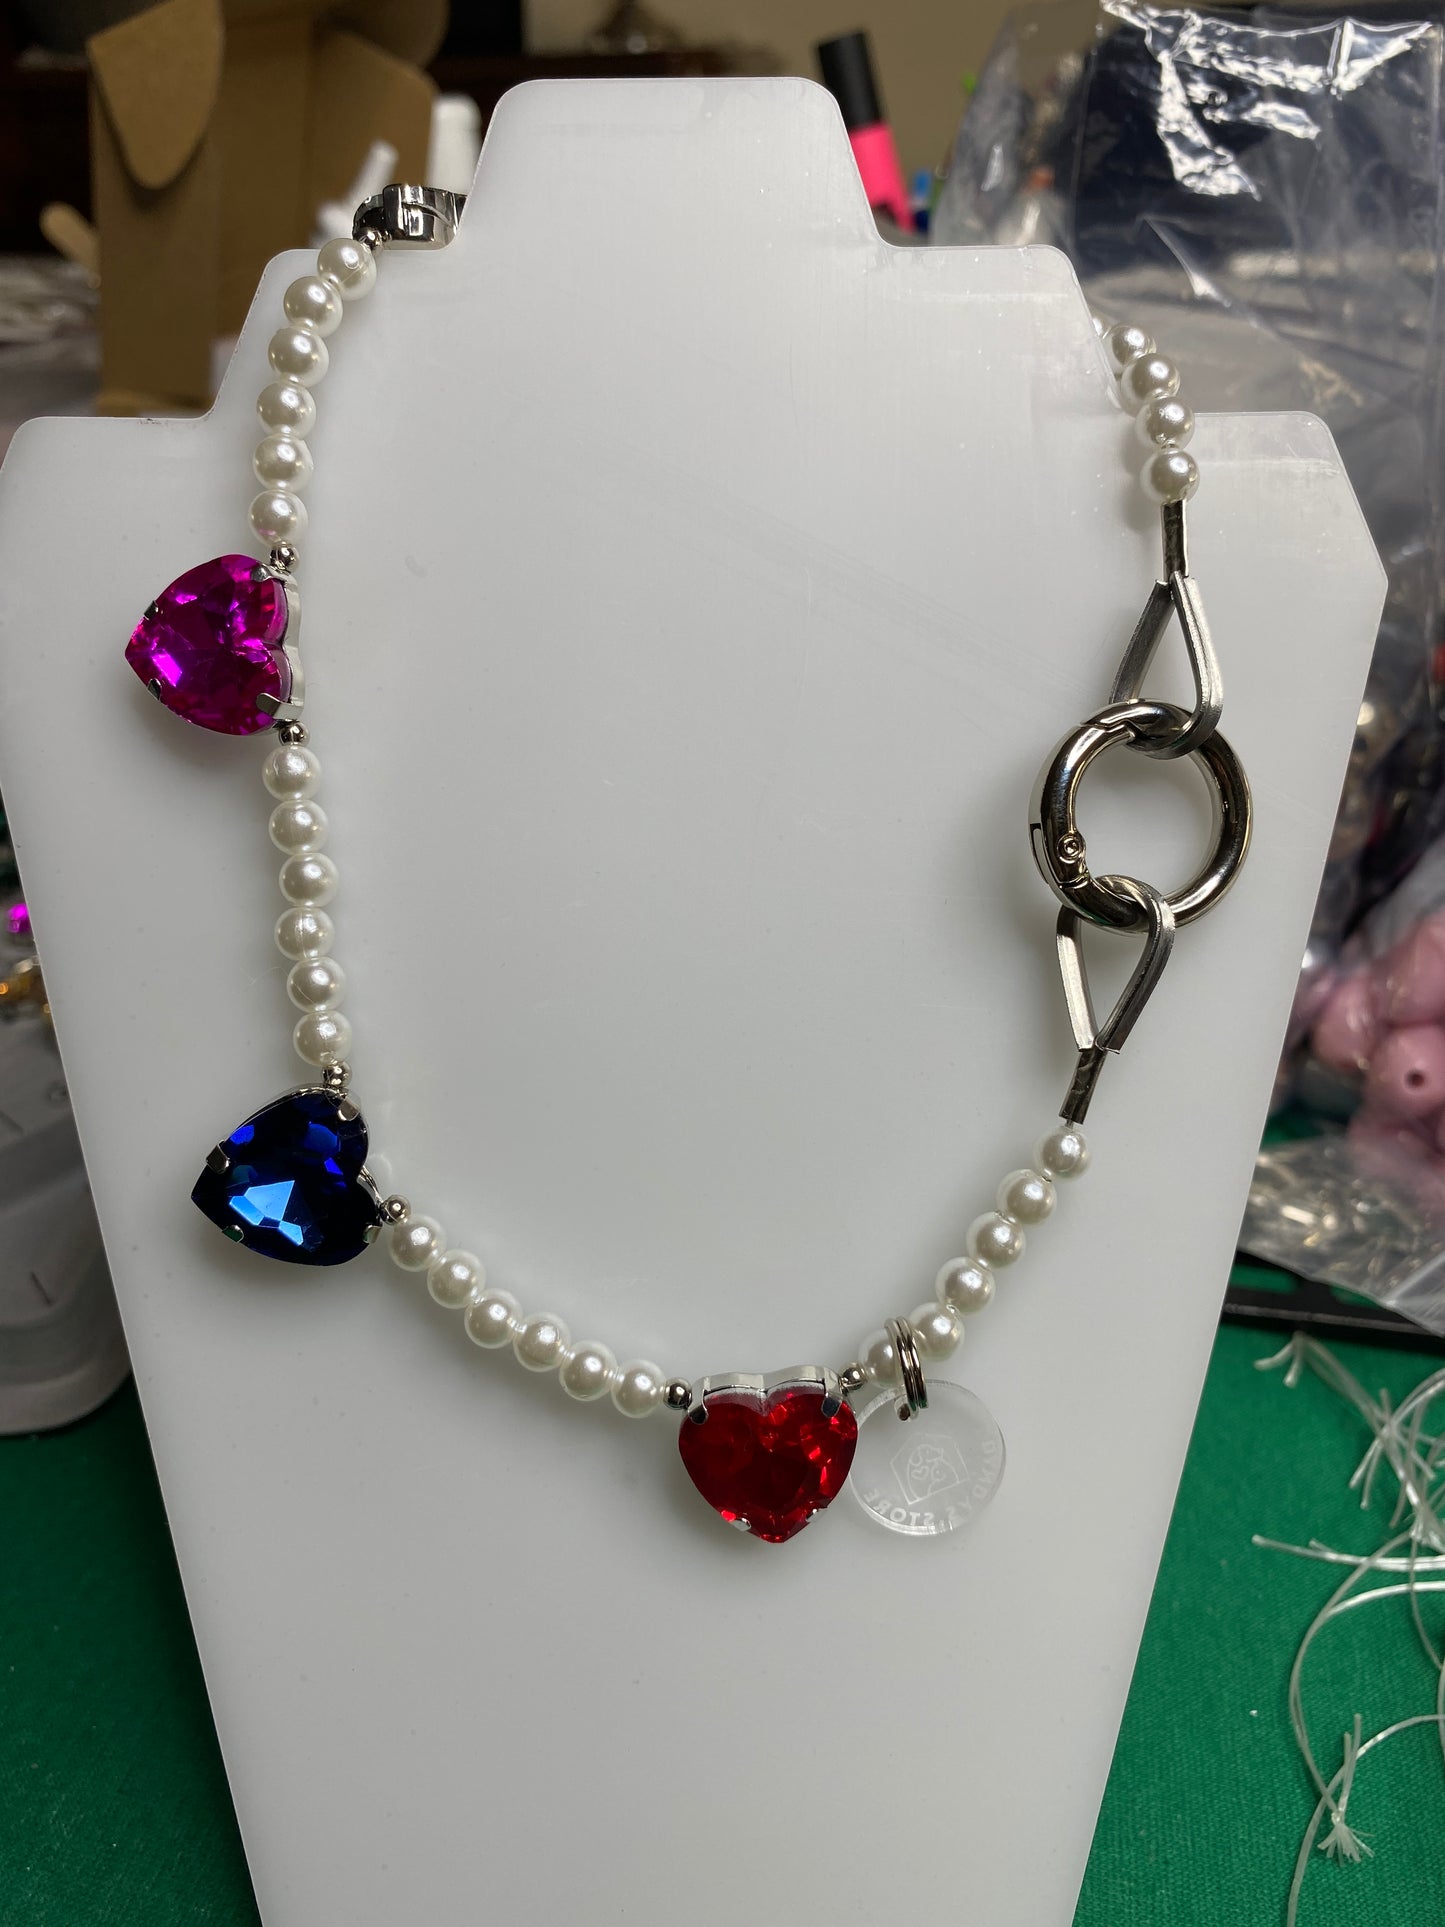 Necklace with Small Pearls and Heart-shaped semiprecious stones. Handmade with love for your pet.